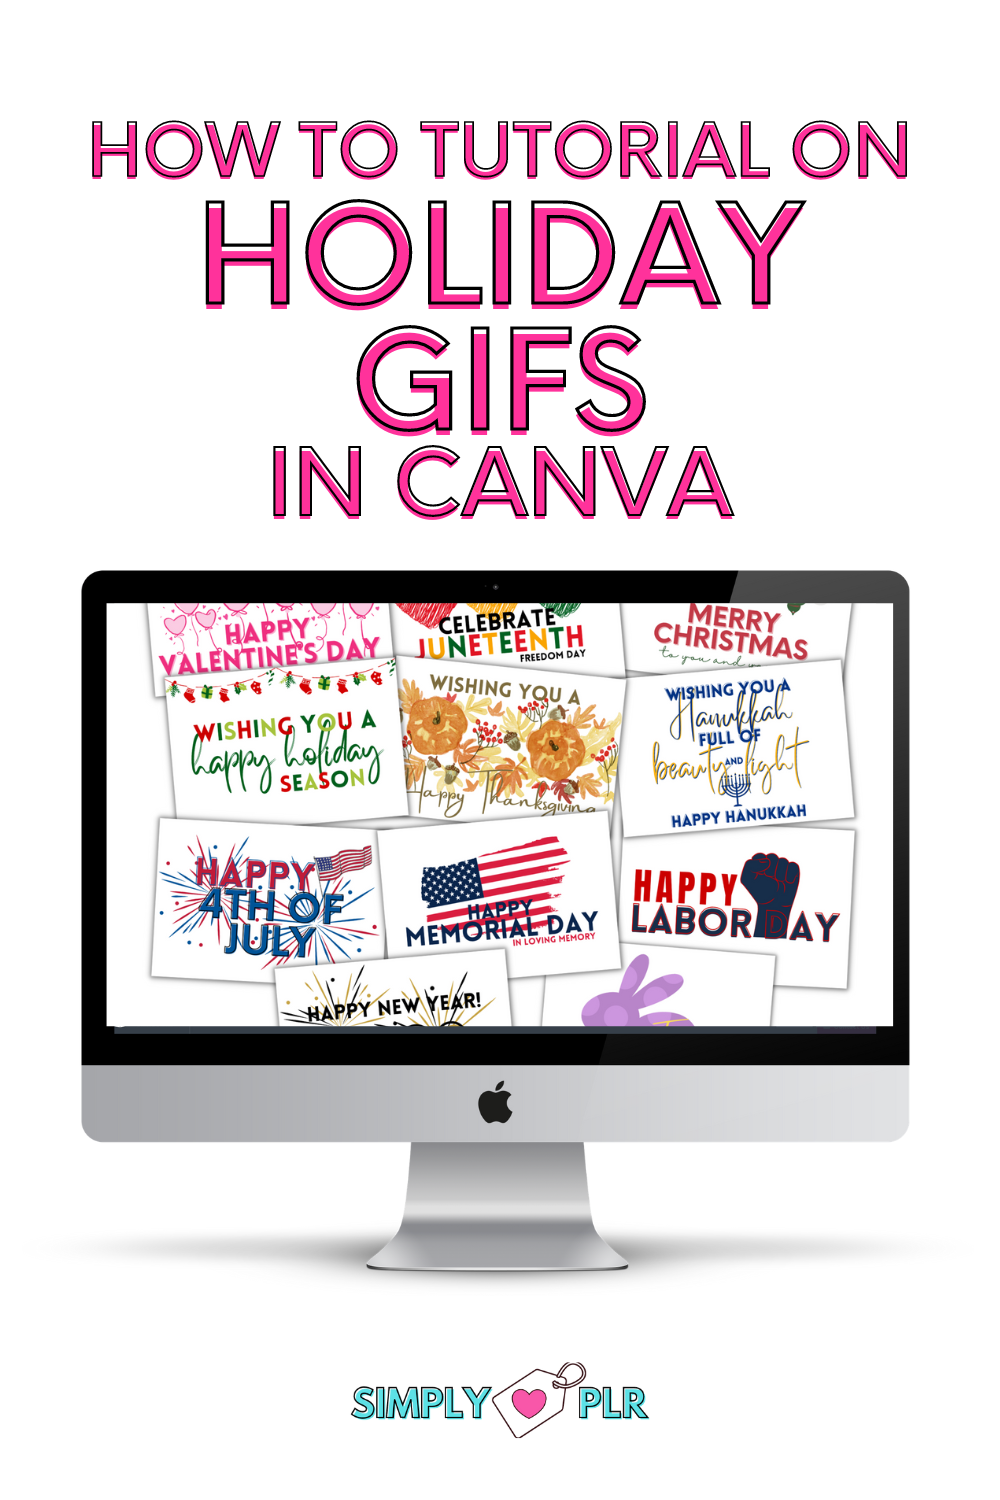 Simply Love PLR How to Tutorial for Holiday GIFs